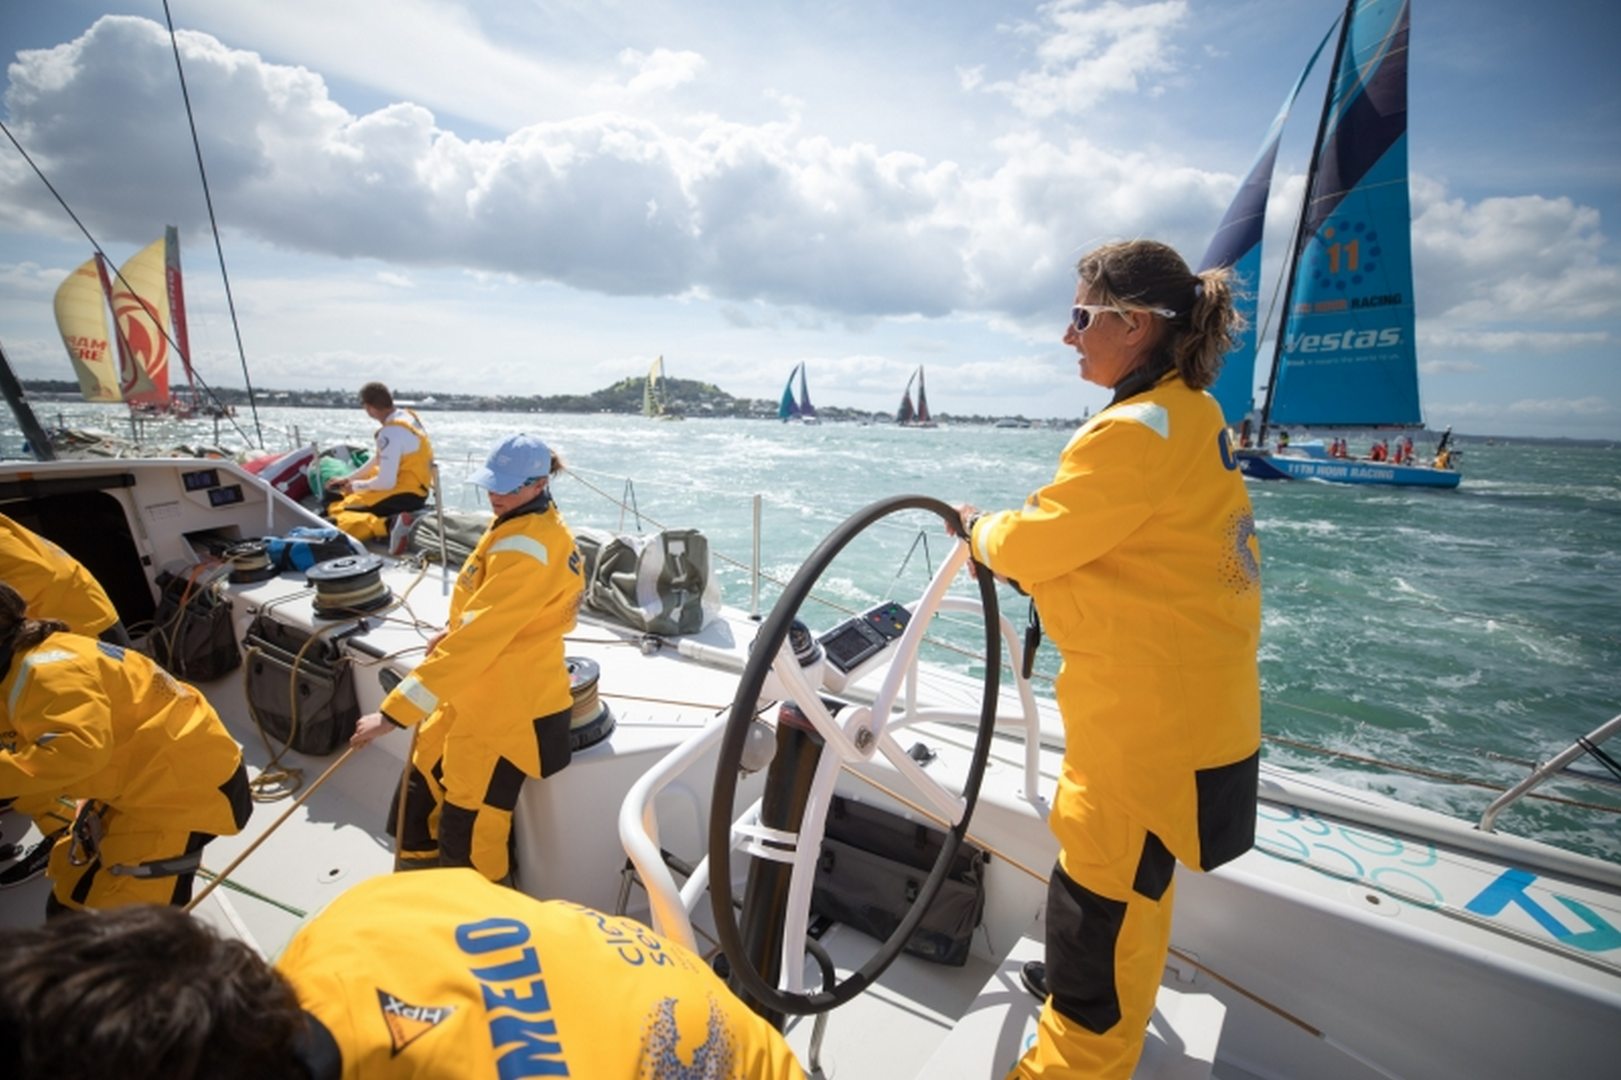 Volvo Ocean Race Leg 7 from Auckland to Itajai, day 1 on board Turn the Tide on Plastic